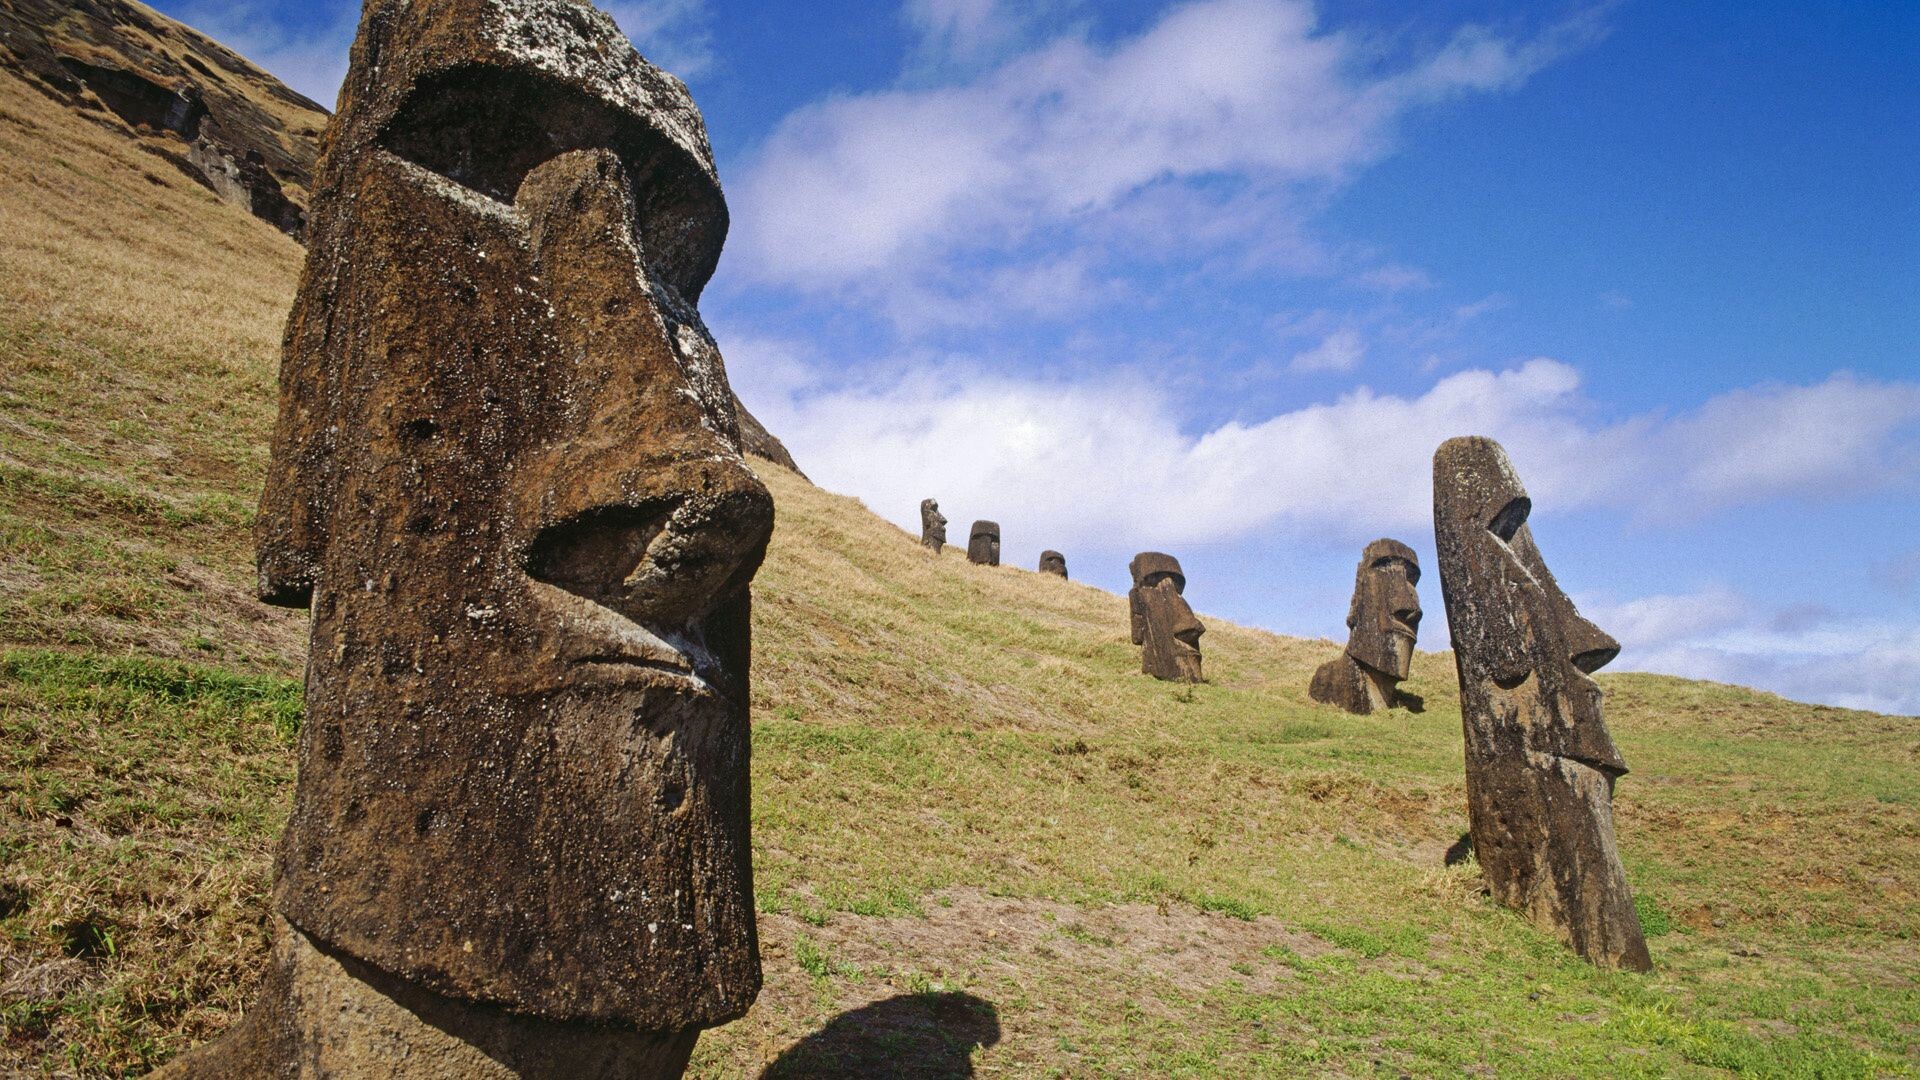 Moai: Easter Island, Most of the statues were carved from volcanic ash known as tuff. 1920x1080 Full HD Wallpaper.